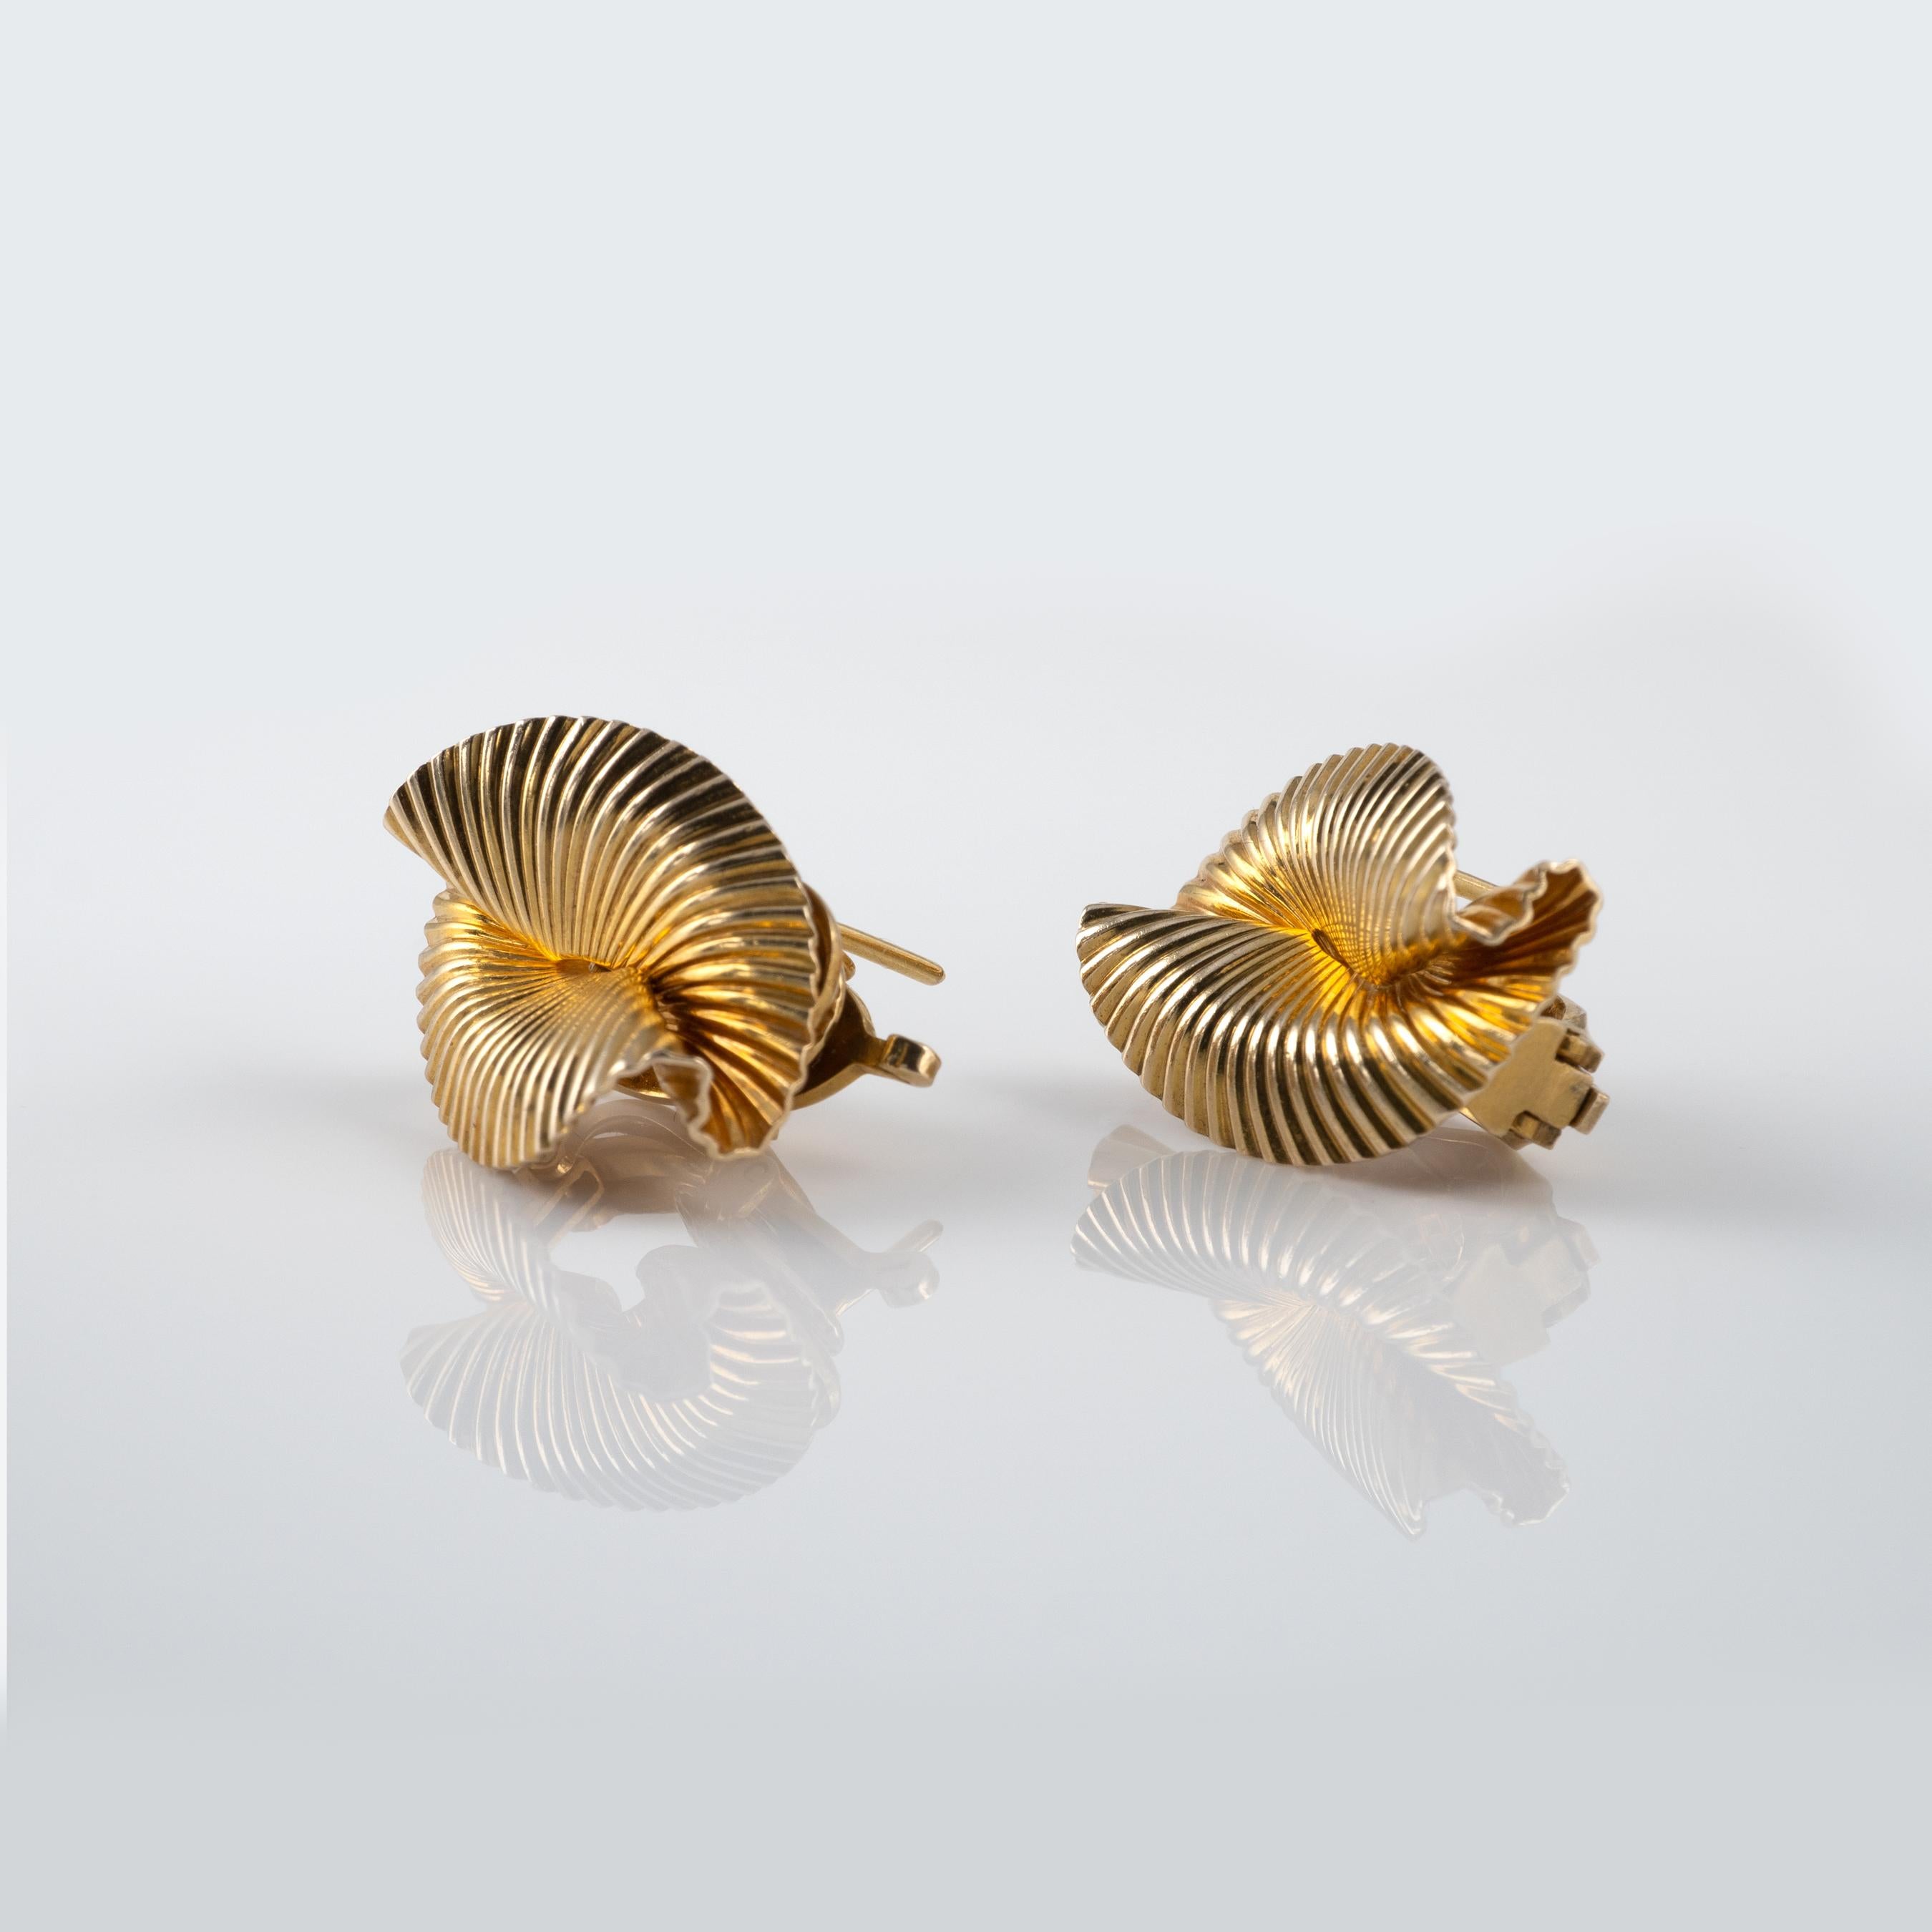 Pair Of Classic 1950S Tiffany & Co Double Fan Earrings 14 Karat Yellow Gold

These fabulous clip earrings are crafted with a fluted (ribbed) texture that is folded into a dynamic fan shape. The backs are stamped with' TIFFANY & CO' and 'PAT 2423905.